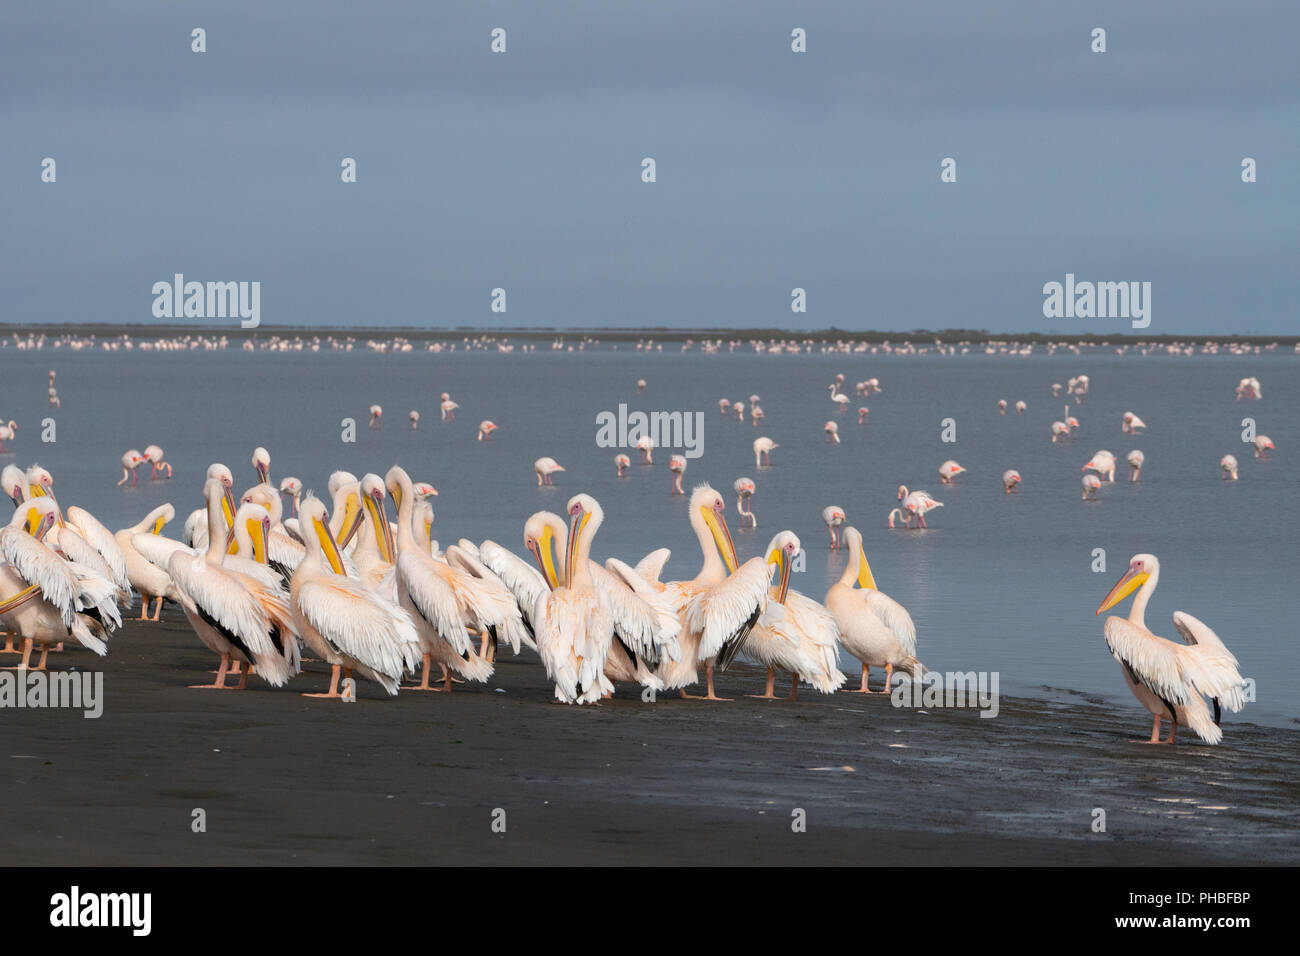 Great White African Pelicans gather on the Wetlands, Greater Flamingos with pink bills in the background, Walvis Bay, Namibia, Africa Stock Photo